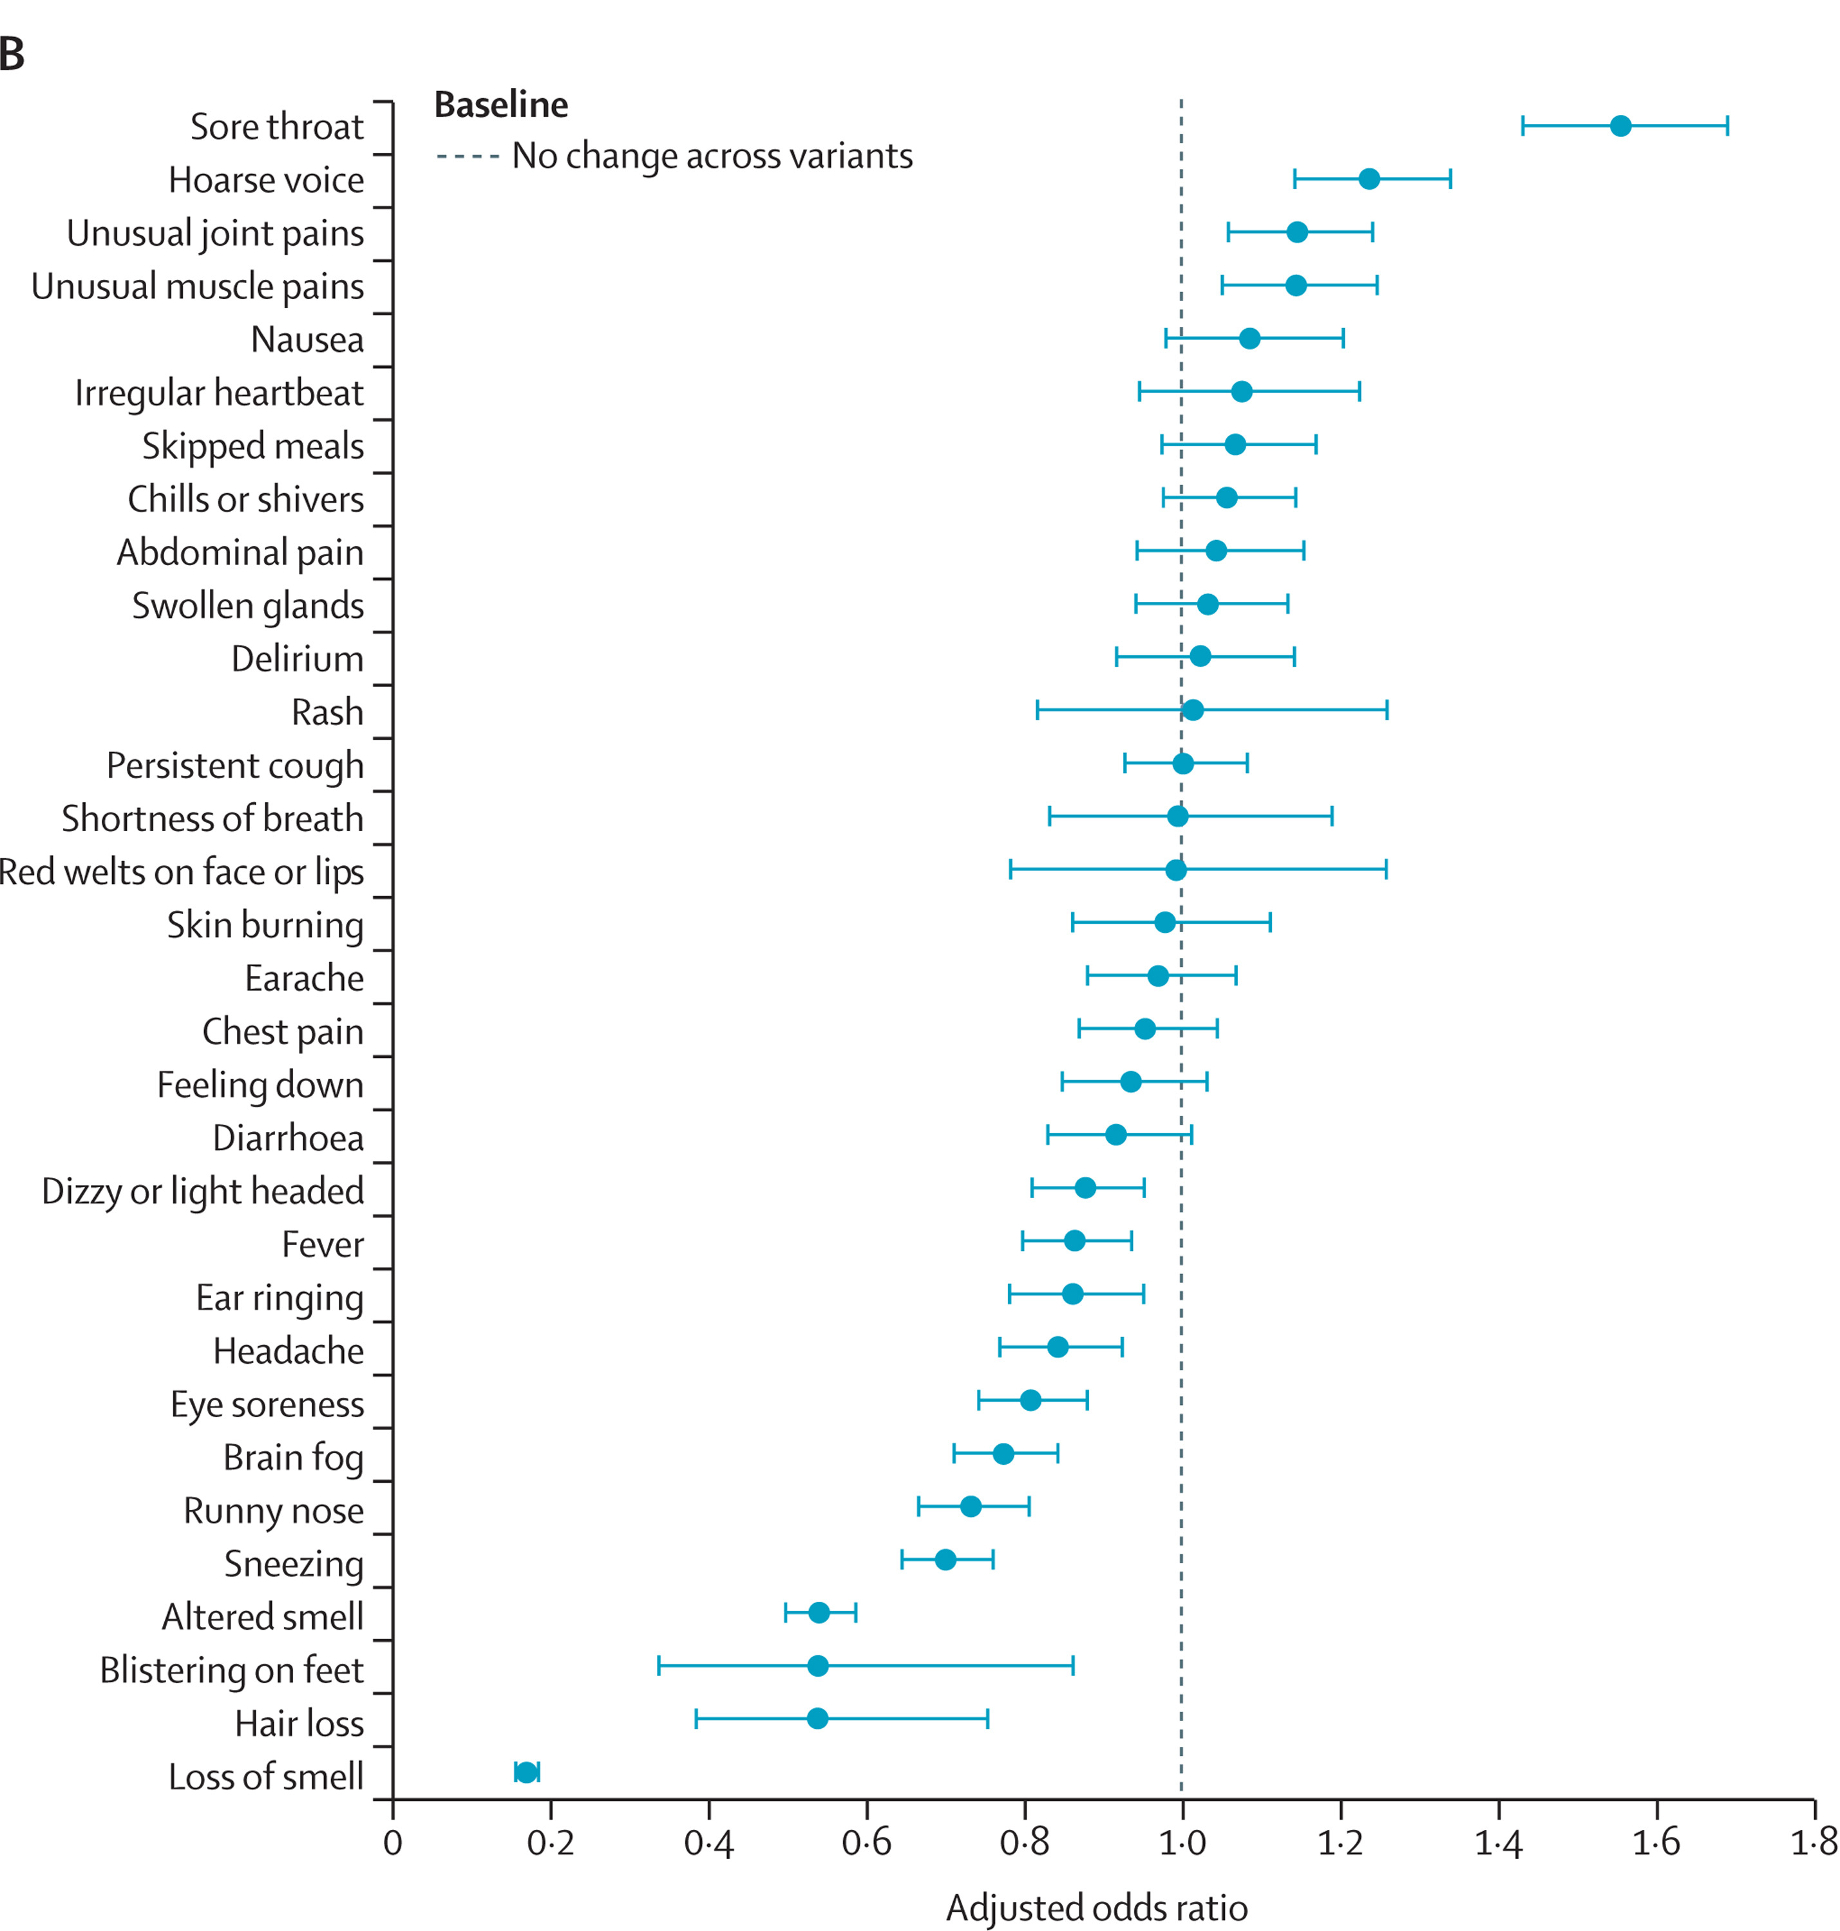 The adjusted odds ratio of symptoms between Omicron and Delta/ Image: Lancet